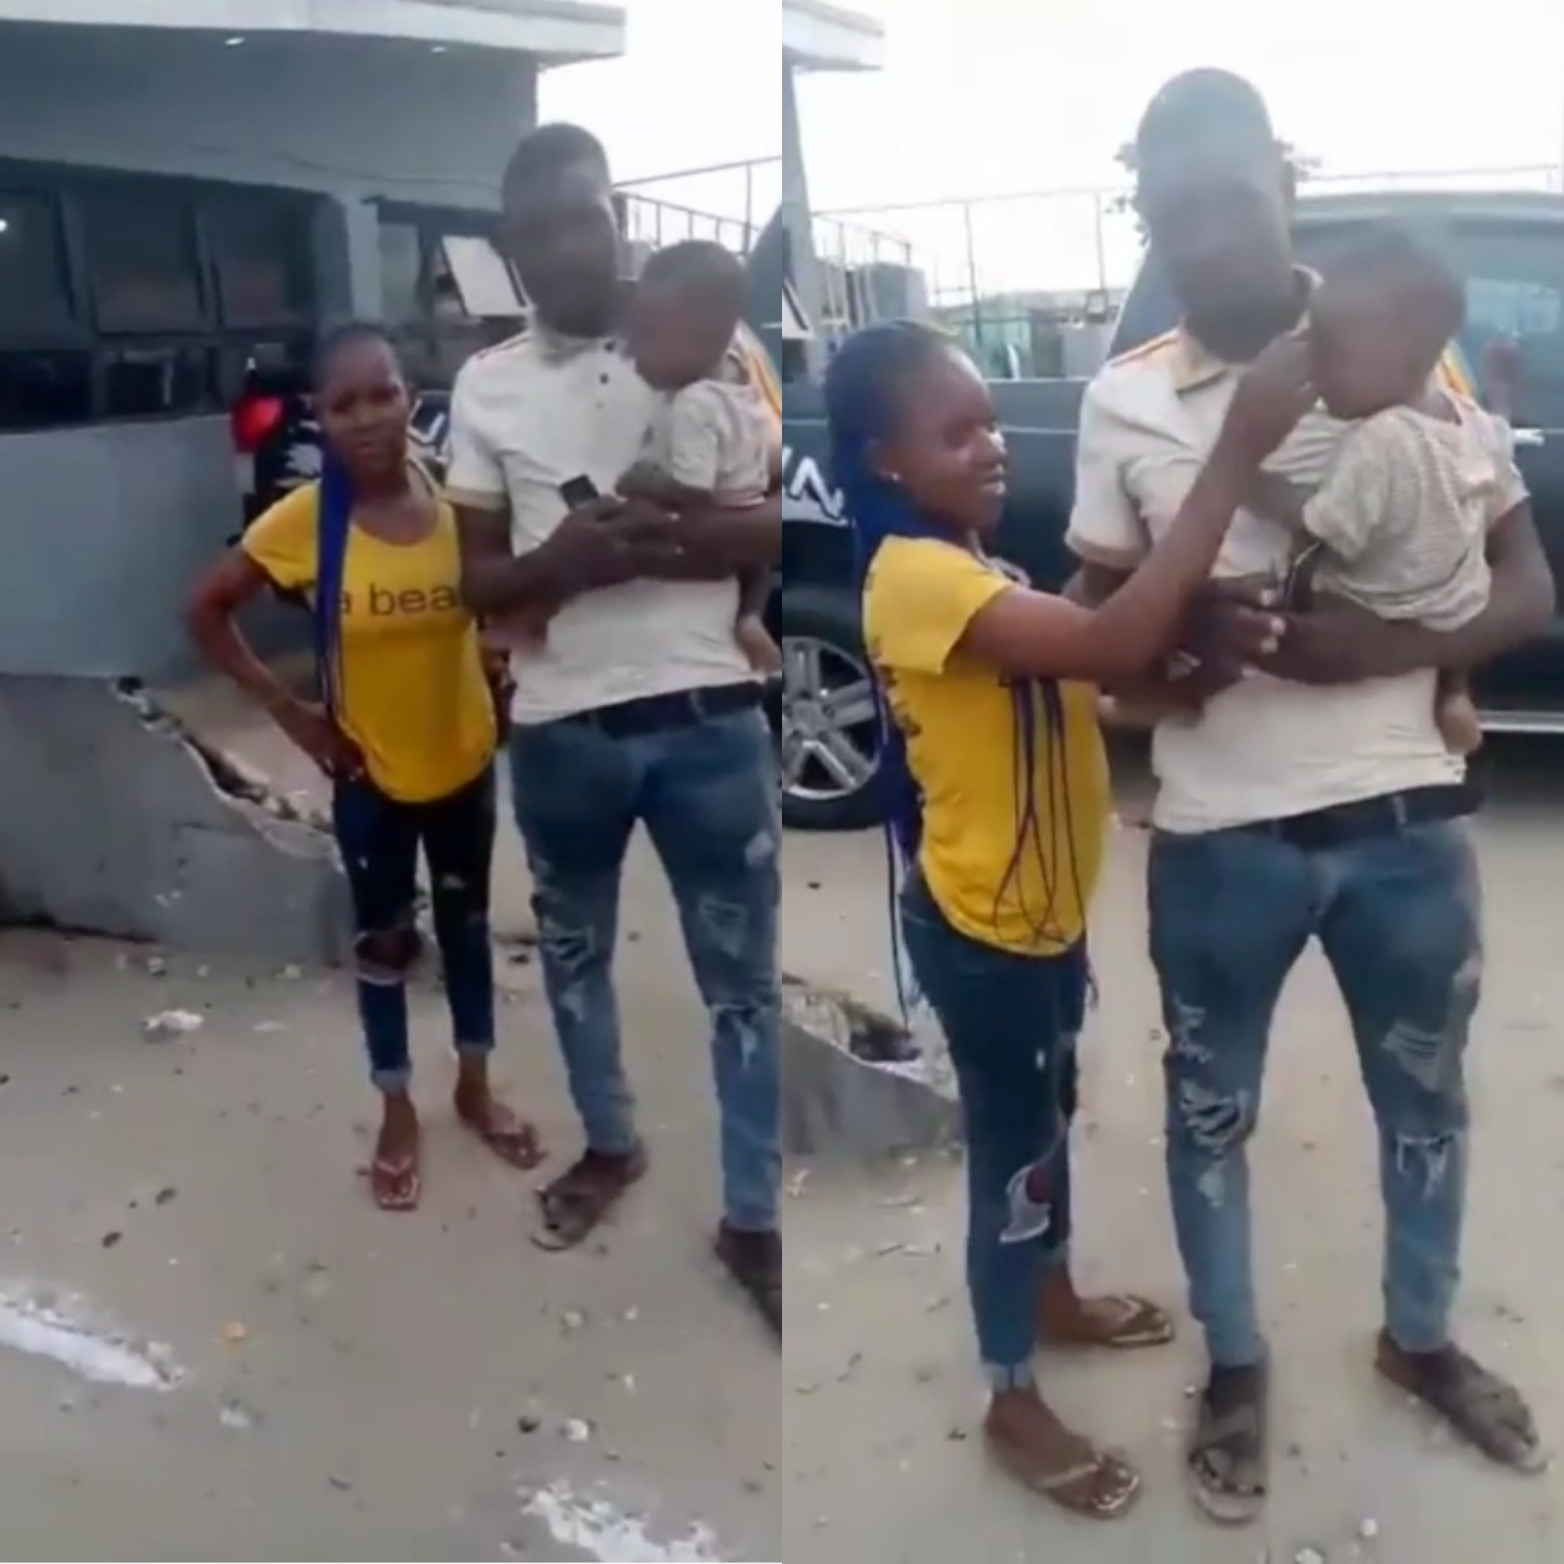 “HE IS INNOCENT. HE DID NOT KIDNAP MY BABY” MOTHER EXONERATES DISPATCH RIDER OF ANY WRONGDOING FOLLOWING CLAIMS HE WAS CAUGHT WITH A BABY IN HIS DELIVERY BOX (photos)